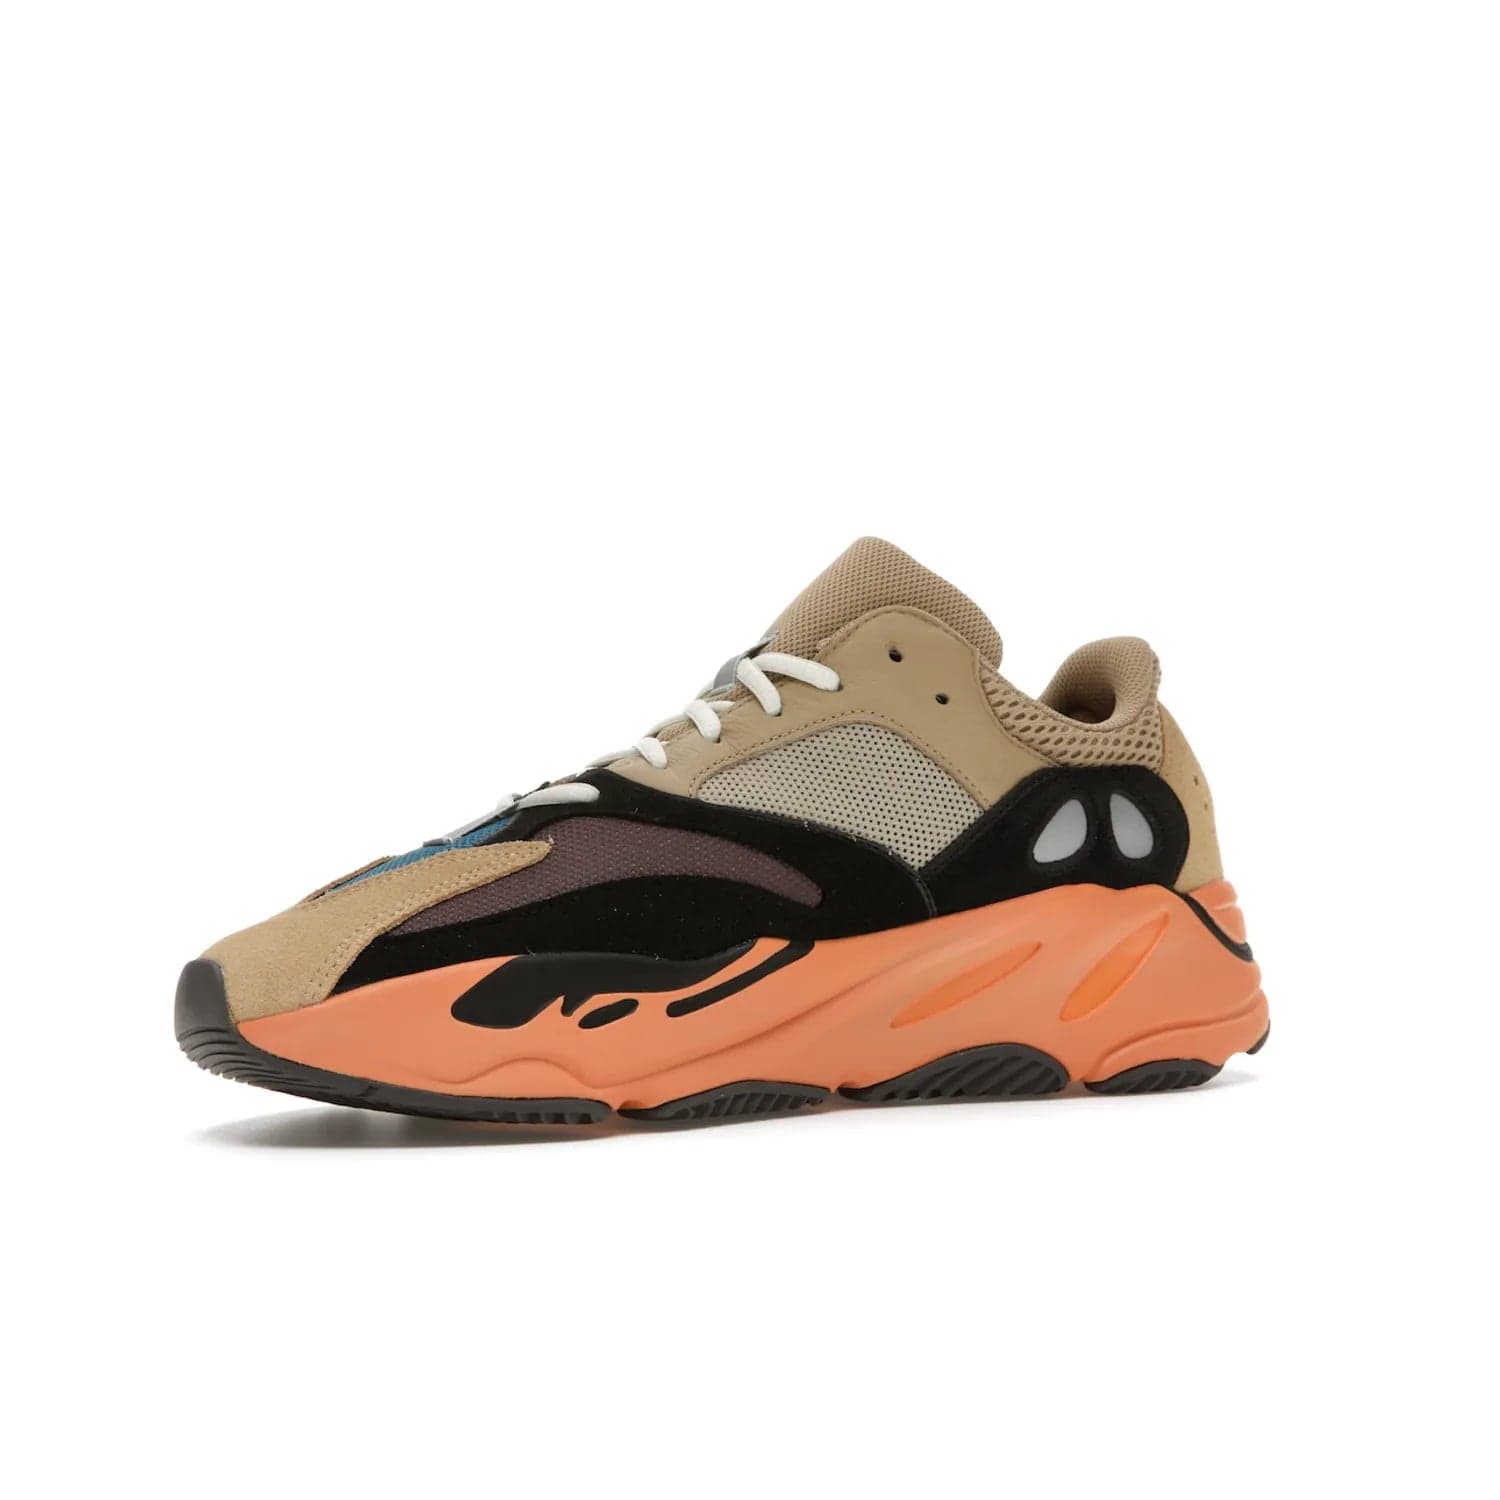 adidas Yeezy Boost 700 Enflame Amber - Image 16 - Only at www.BallersClubKickz.com - Adidas Yeezy Boost 700 Enflame Amber: Eye-catching design with pale yellow, brown, teal, and orange! Get yours in June 2021.